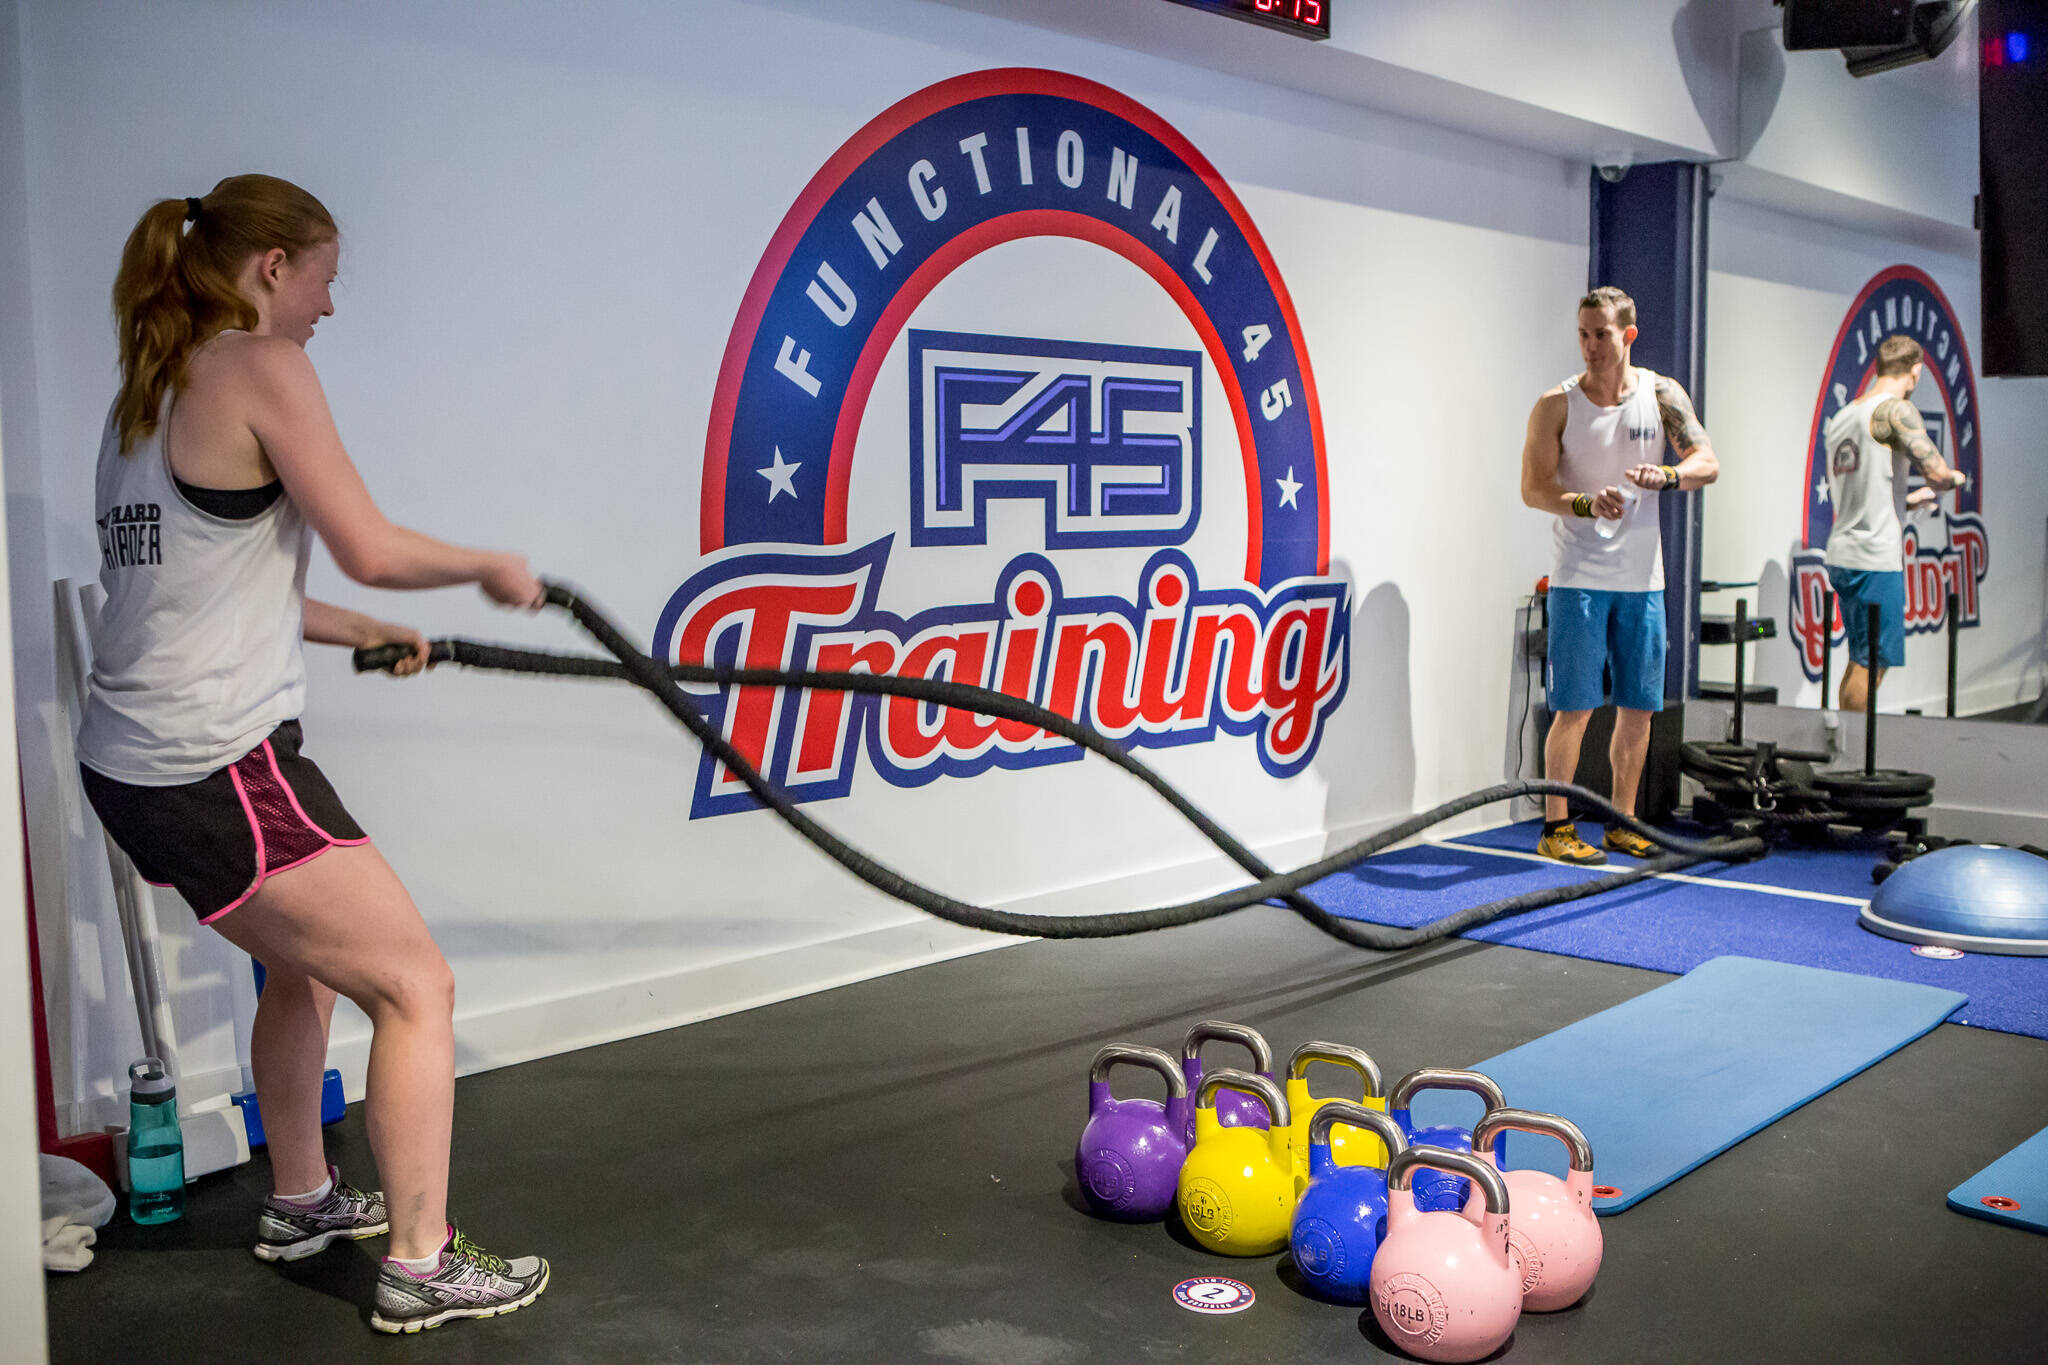 The top 25 gyms in Toronto by neighbourhood